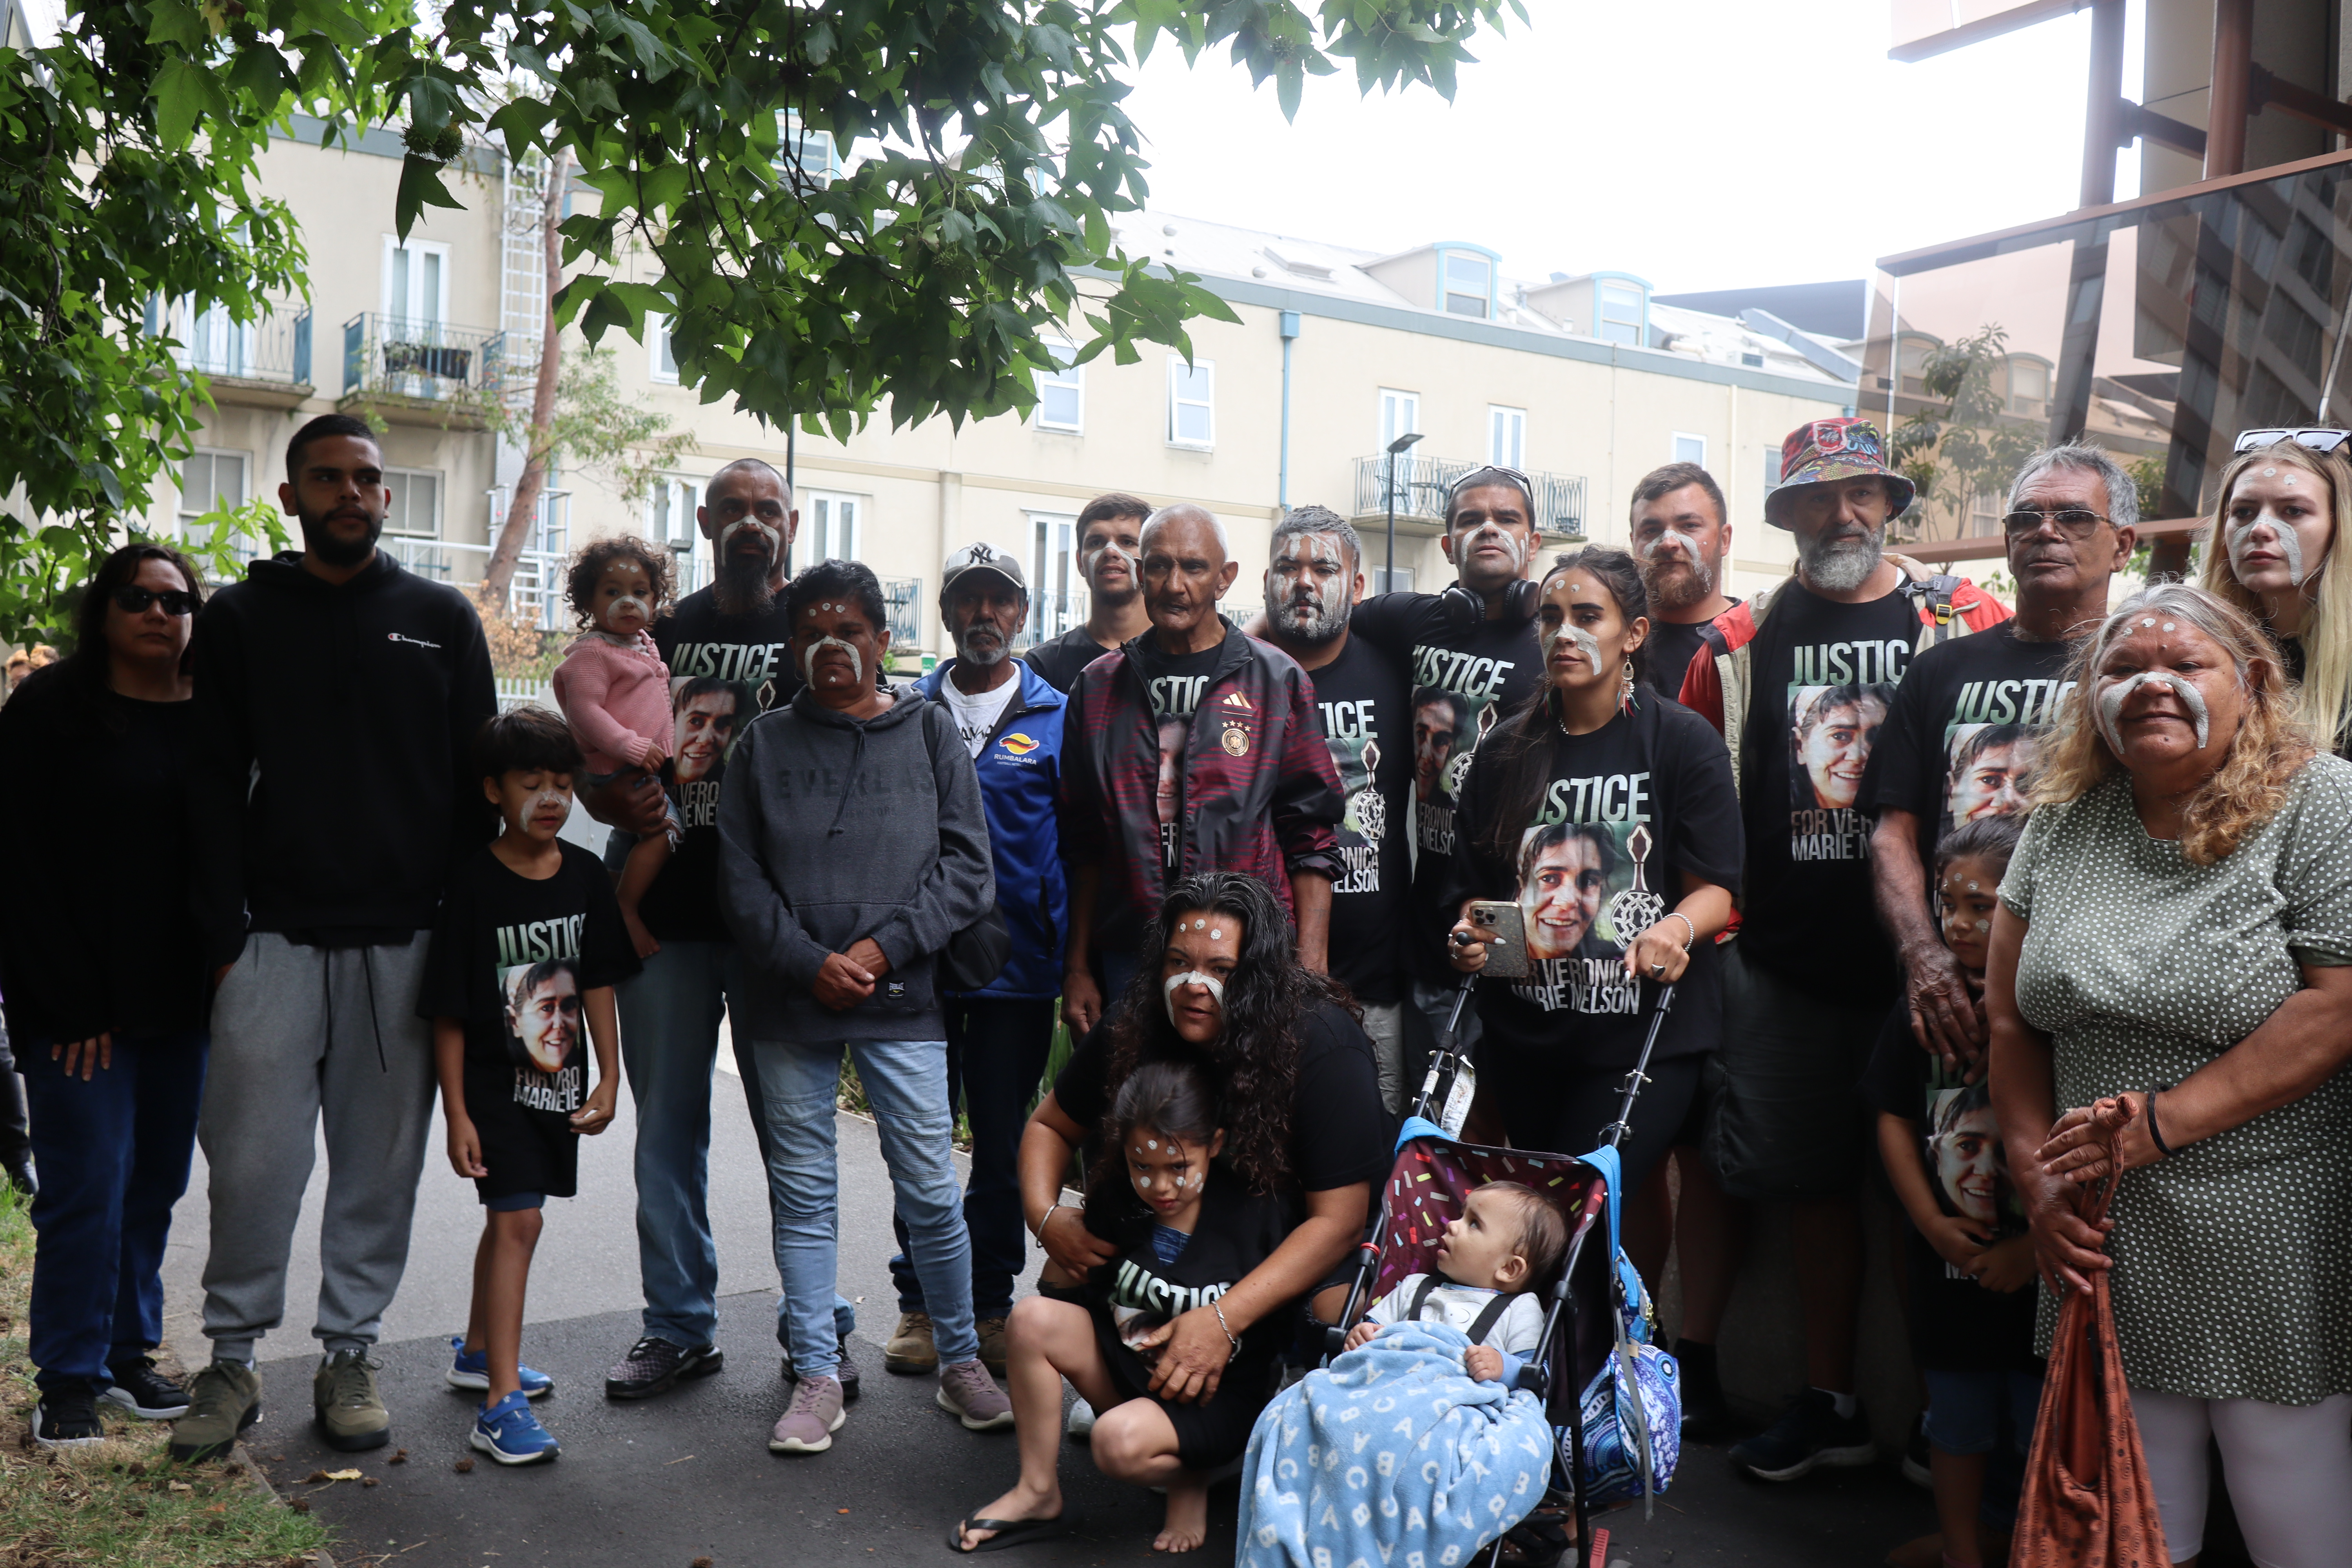 A photograph of 20 of Veronica Nelson's family and friends, including children, looking at the camera and standing together in front of the Coroners Court of Victoria, many of whom are 'painted up' with a curved stripe across nose and cheeks and dots on forehead, and wearing t-shirts that have a photo of Veronica Nelson's smiling face and a line drawing of a turtle that say "JUSTICE FOR VERONICA MARIE NELSON".